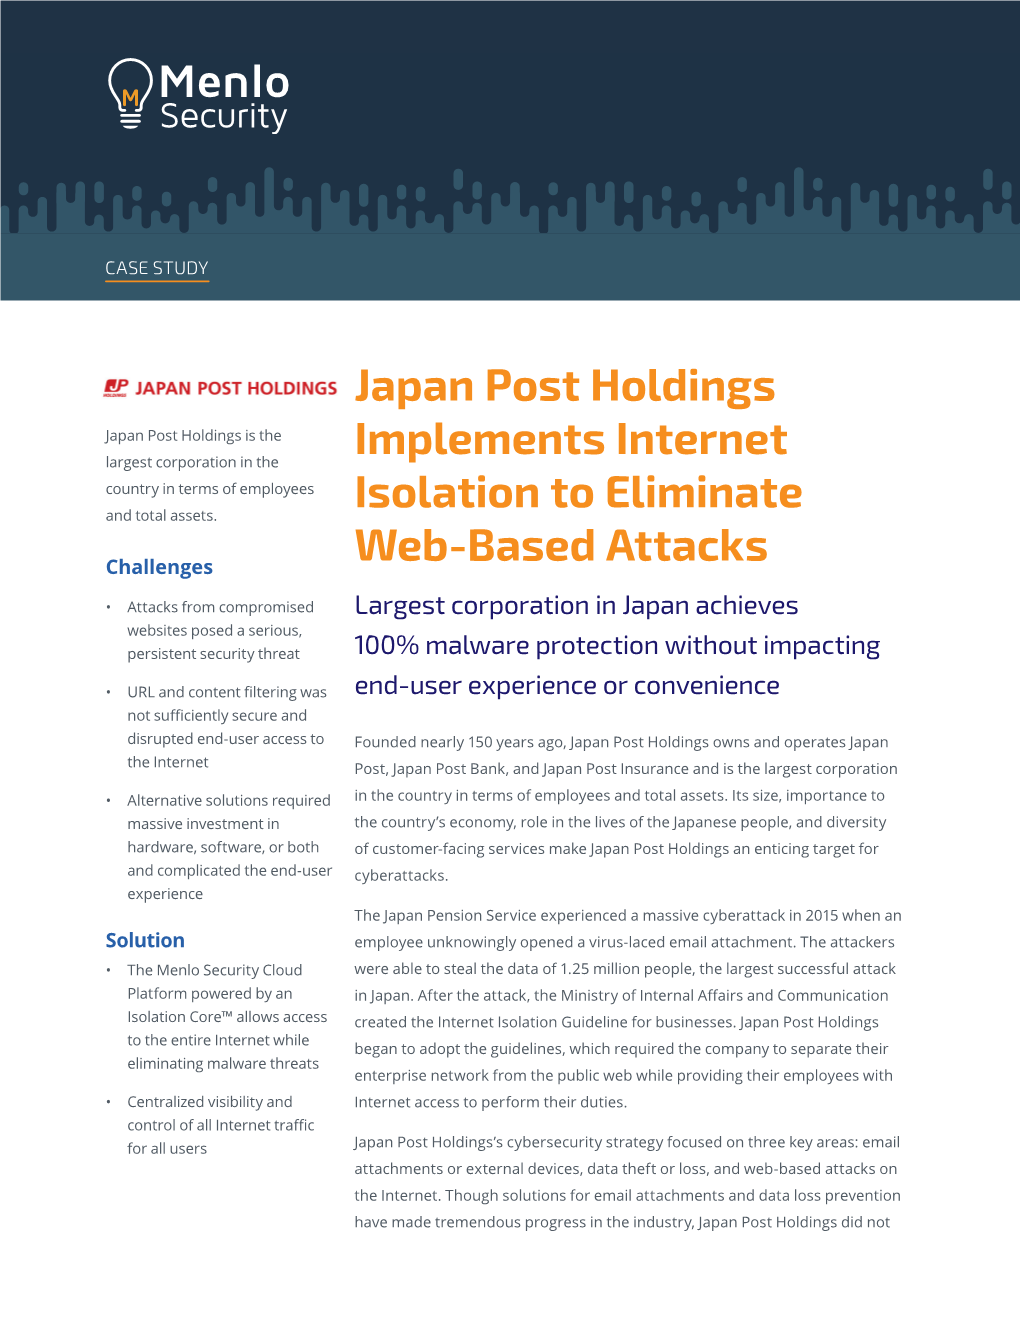 Japan Post Holdings Implements Internet Isolation to Eliminate Web